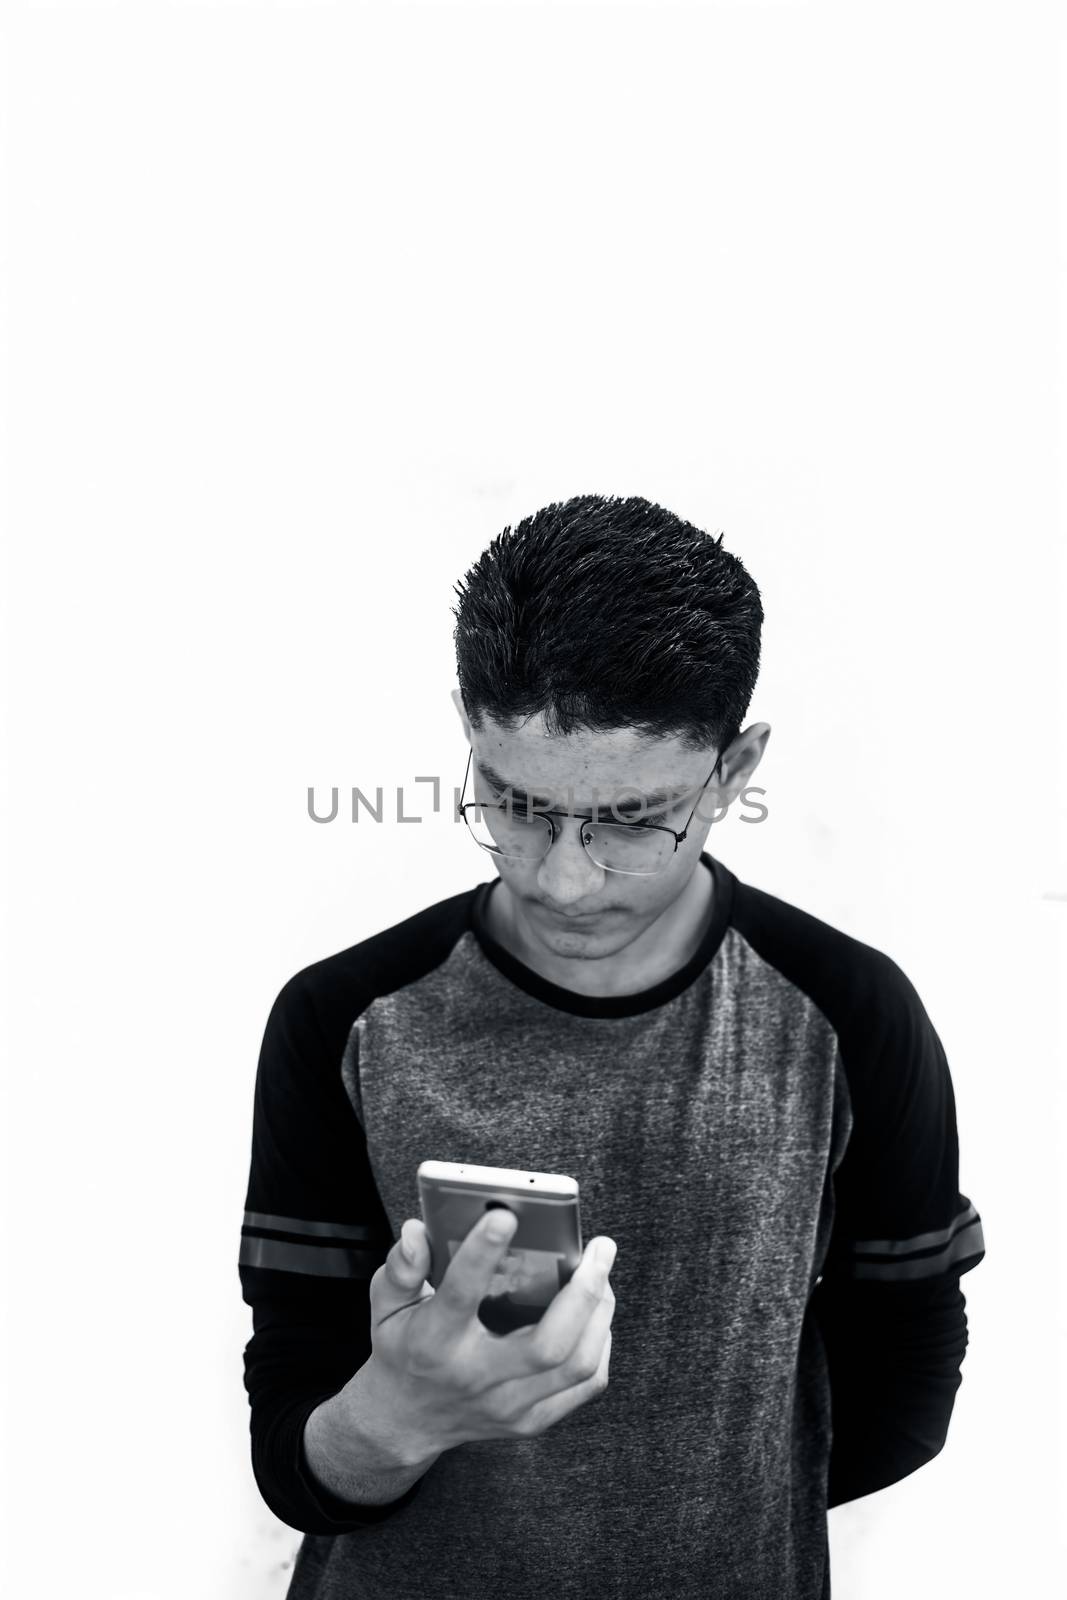 Portrait shot of young teenager wearing black colored t-shirt and using cell phone and posing or expressing various expressions on his face isolated on white. by mirzamlk